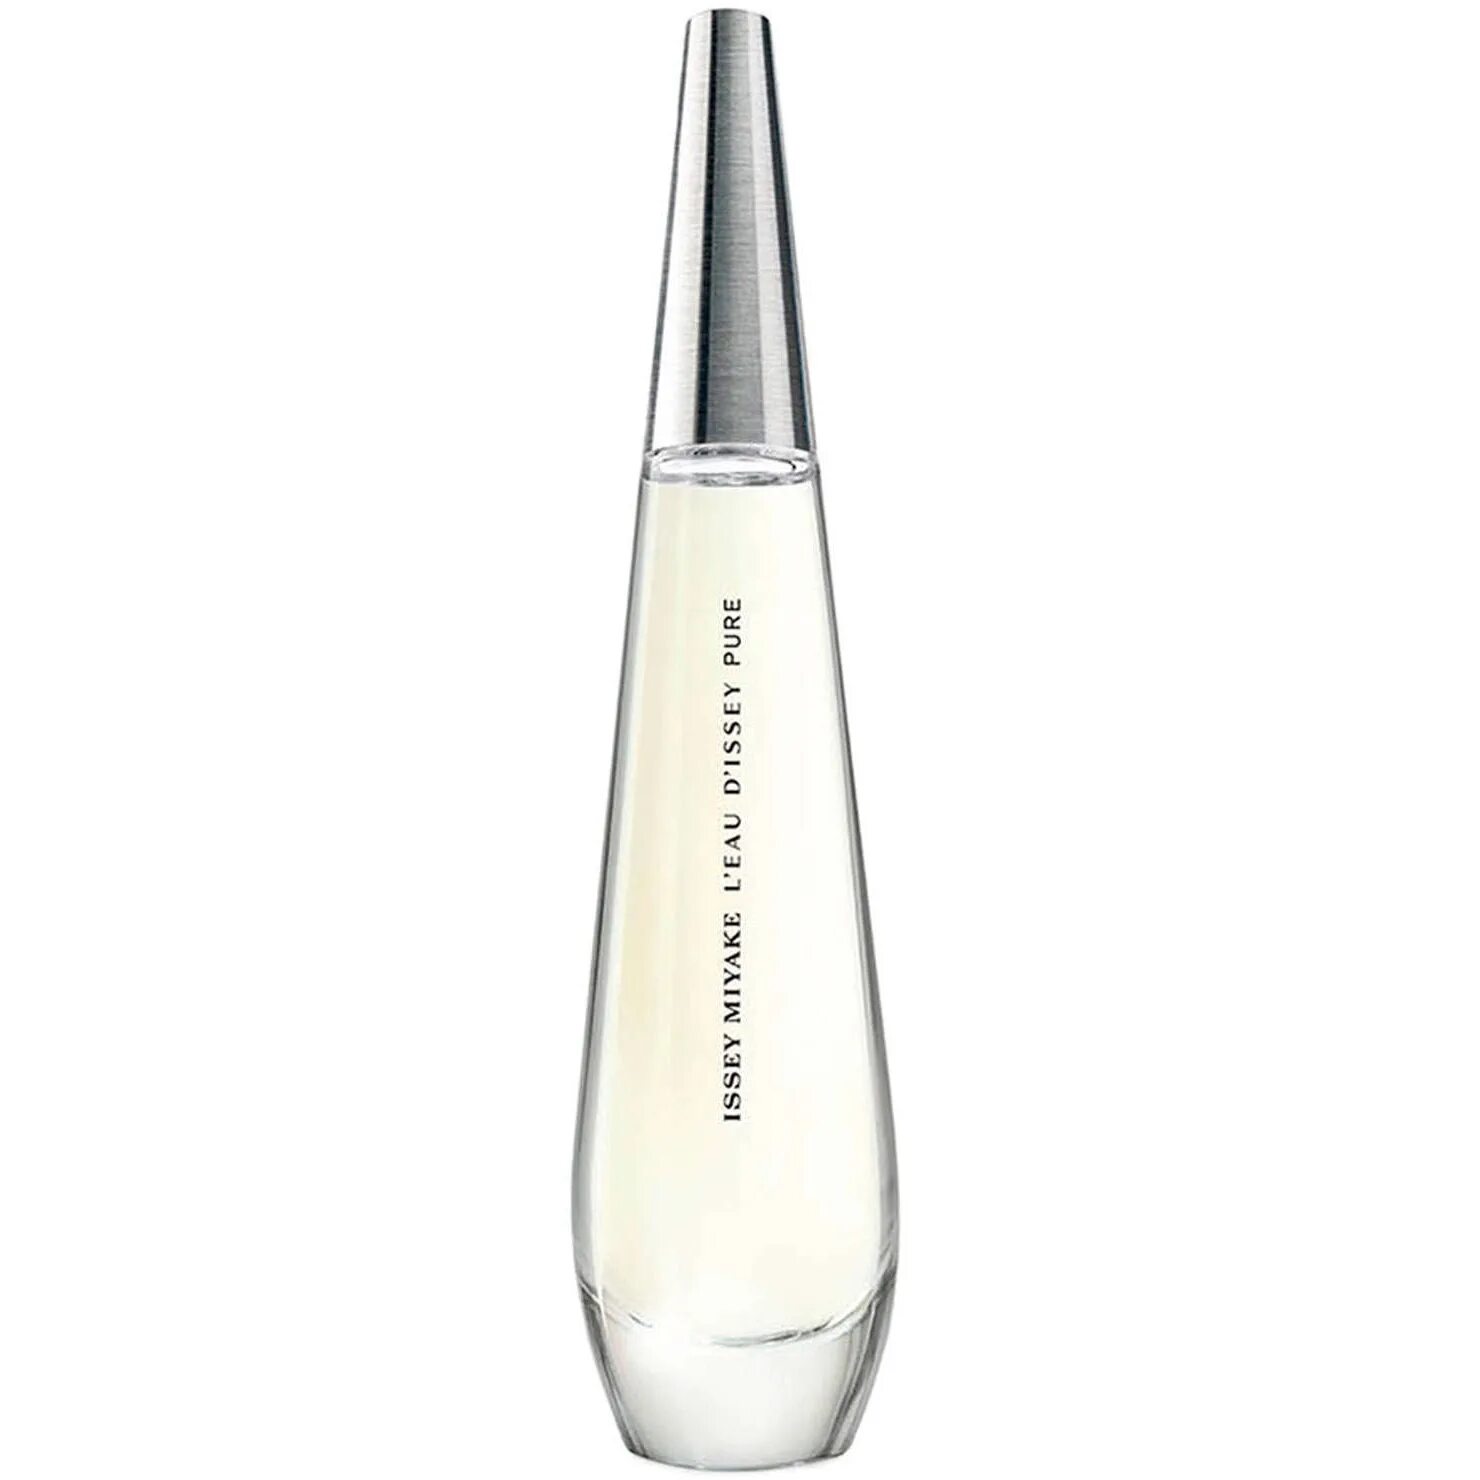 Issey Miyake l'Eau d'Issey Pure 90 мл. Issey Miyake l'Eau d'Issey 100 ml. Issey Miyake l`Eau d`Issey. Issey Miyake l'Eau d'Issey Pure. Туалетная вода d issey